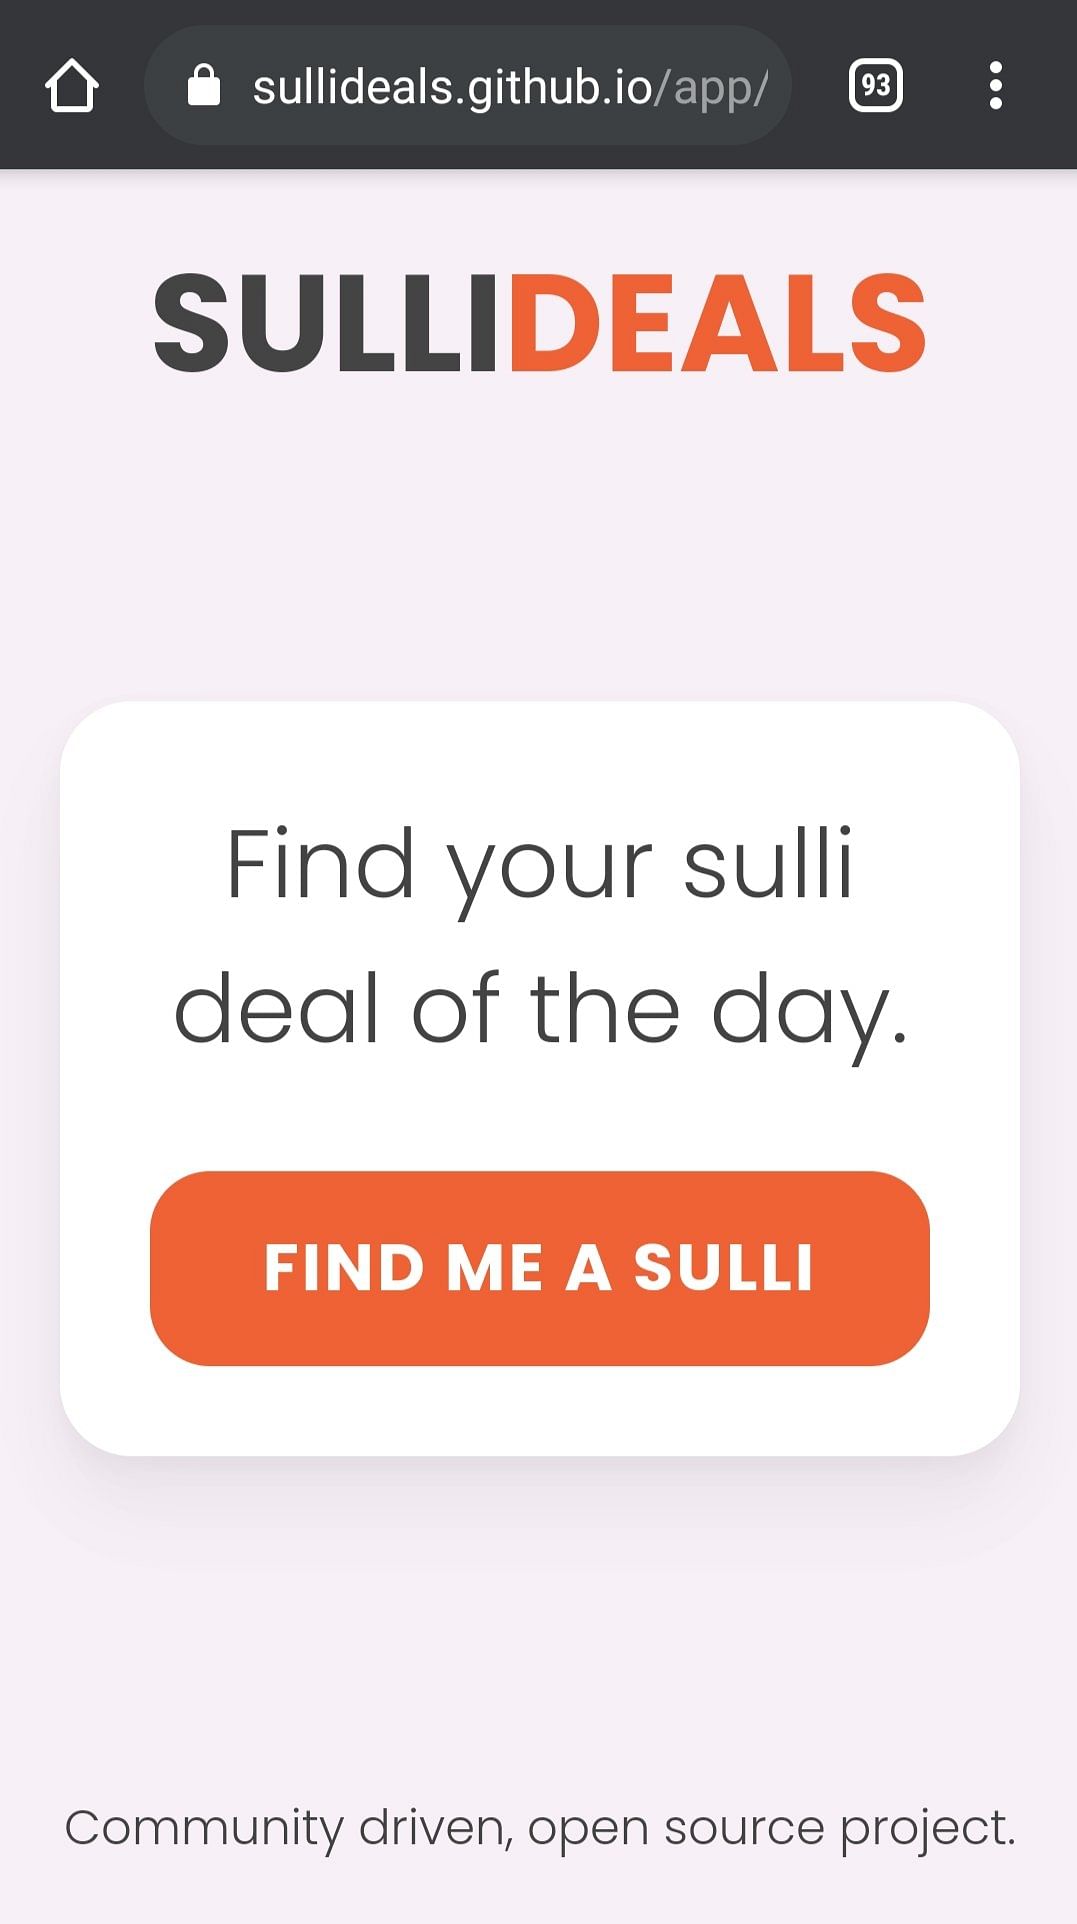 In a shocking display of misogyny, the Sulli Deal app generated photos of Muslim women as deal of the day.